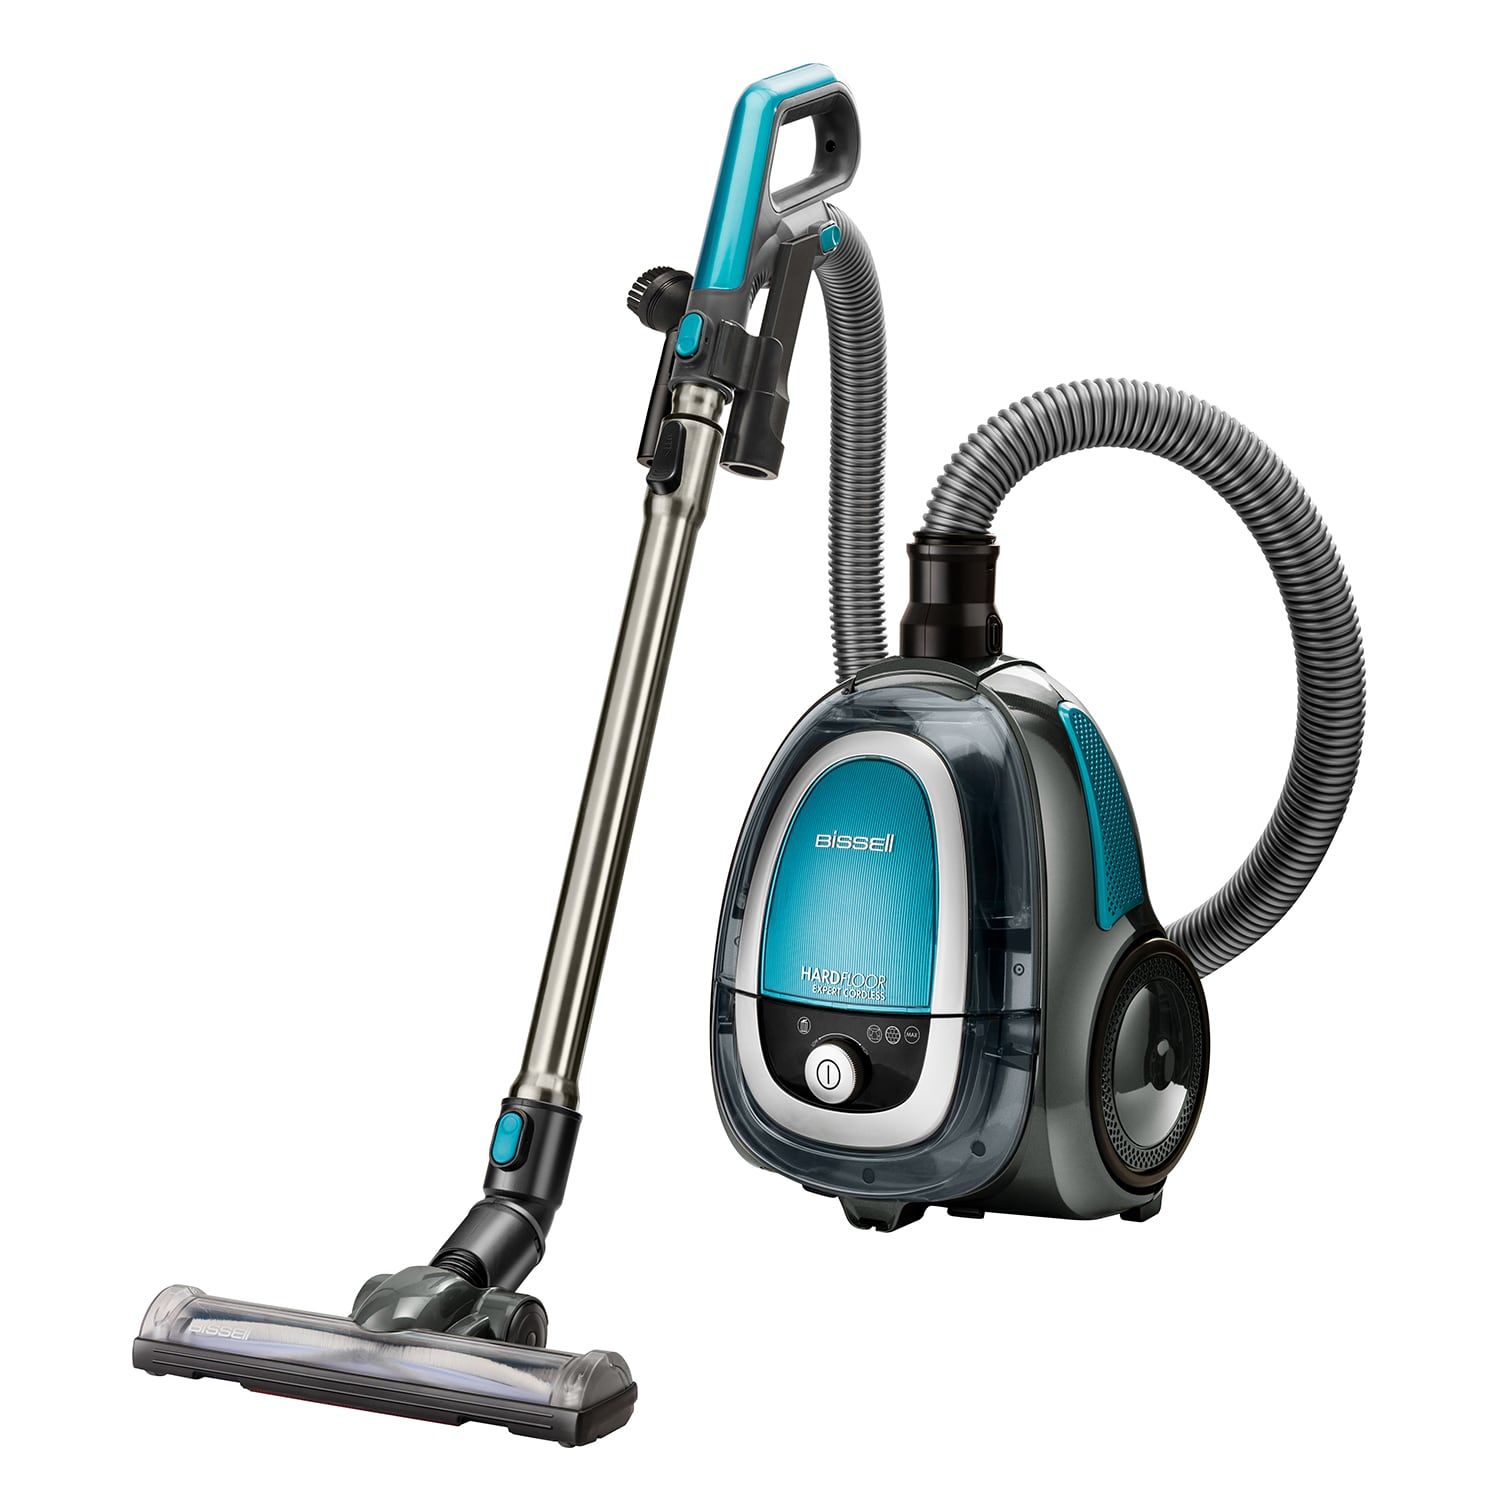 Bissell 2001 Series Hard Floor Expert Canister Vacuum User Guide